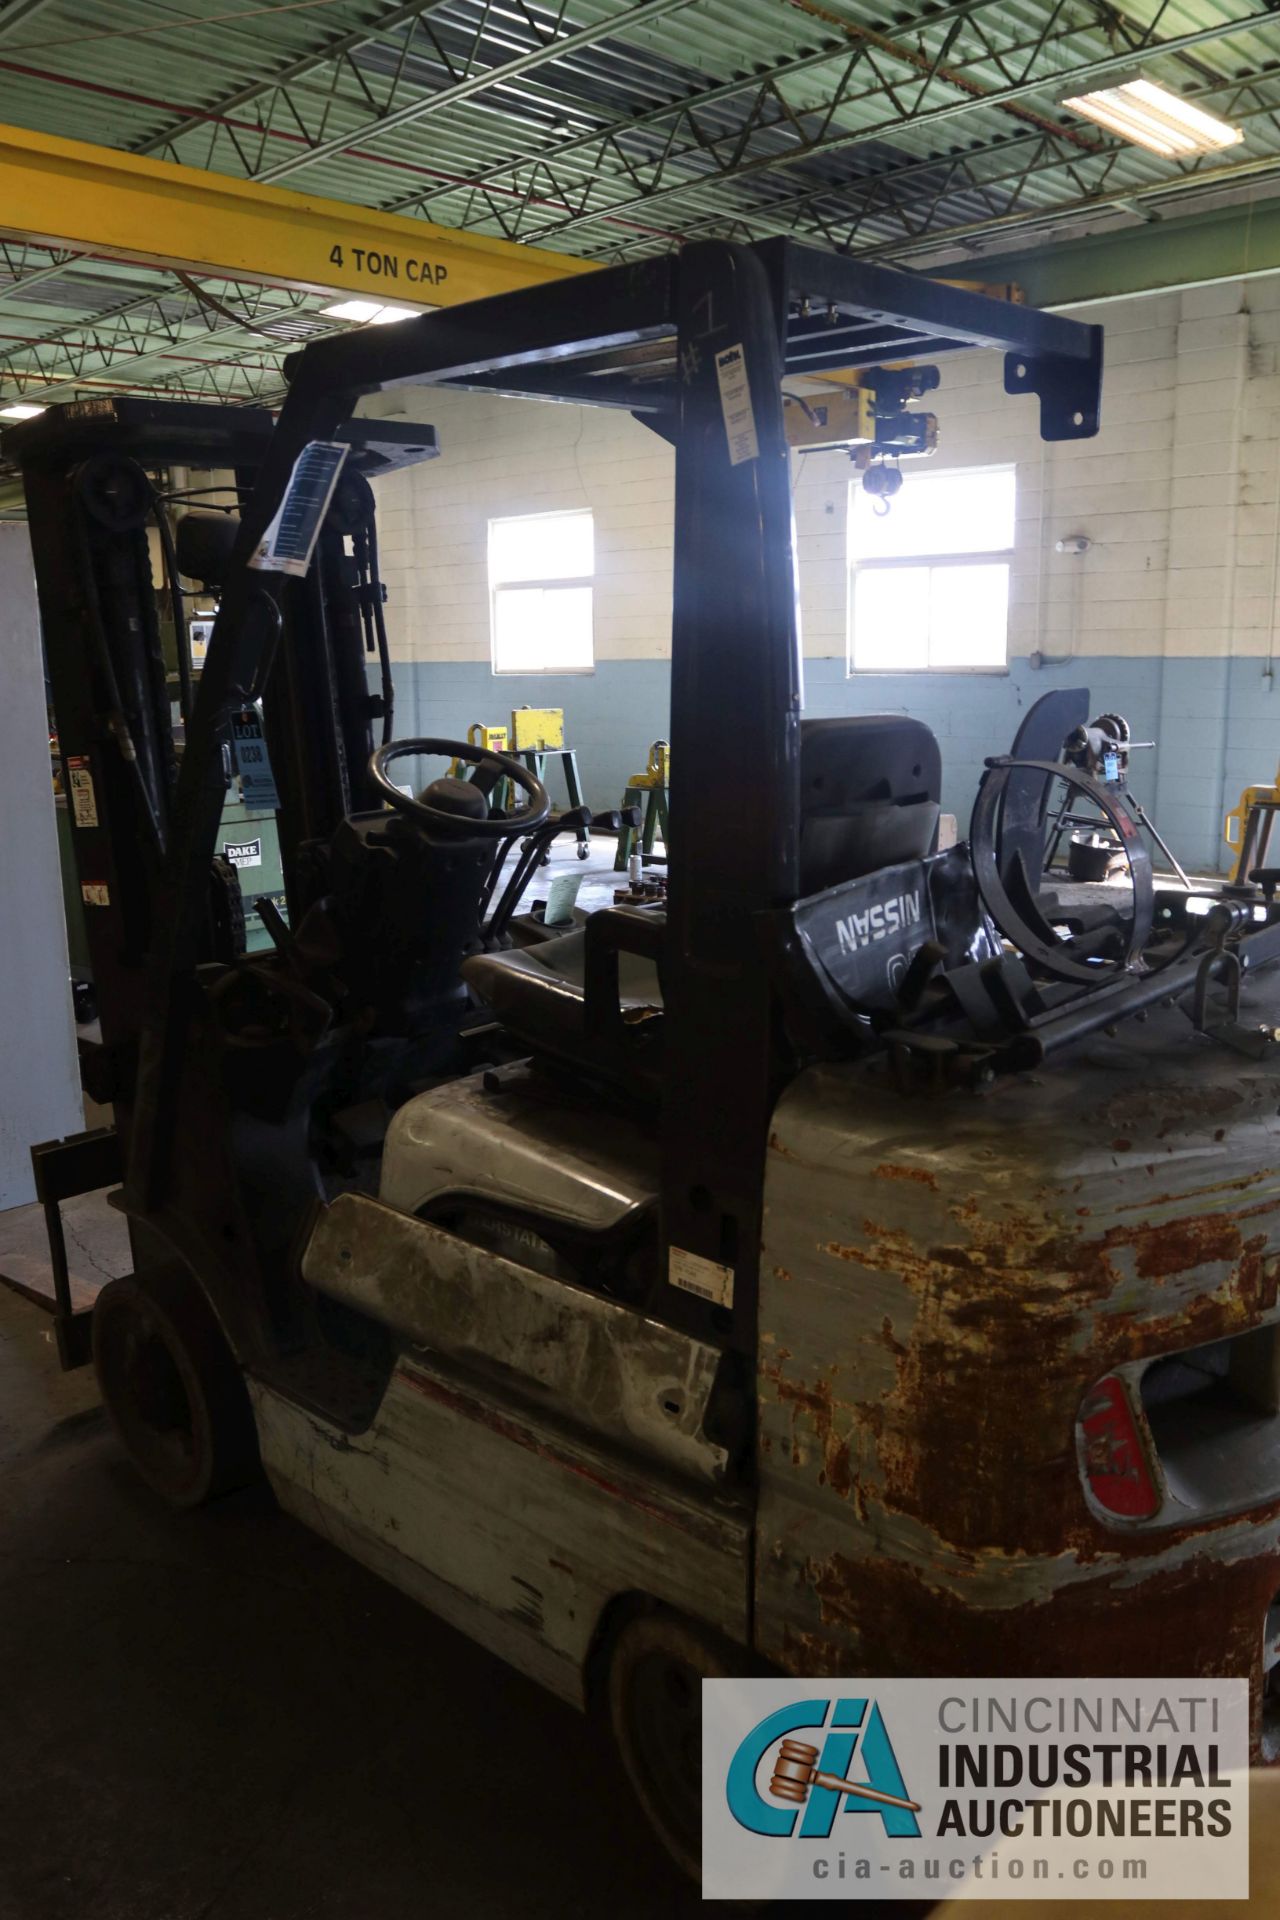 5,550 LB. NISSAN MDOEL MCUL02A30LV LP FORKLIFT; 3-STAGE MAST (169") - $250.00 Rigging Fee Due to - Image 2 of 3